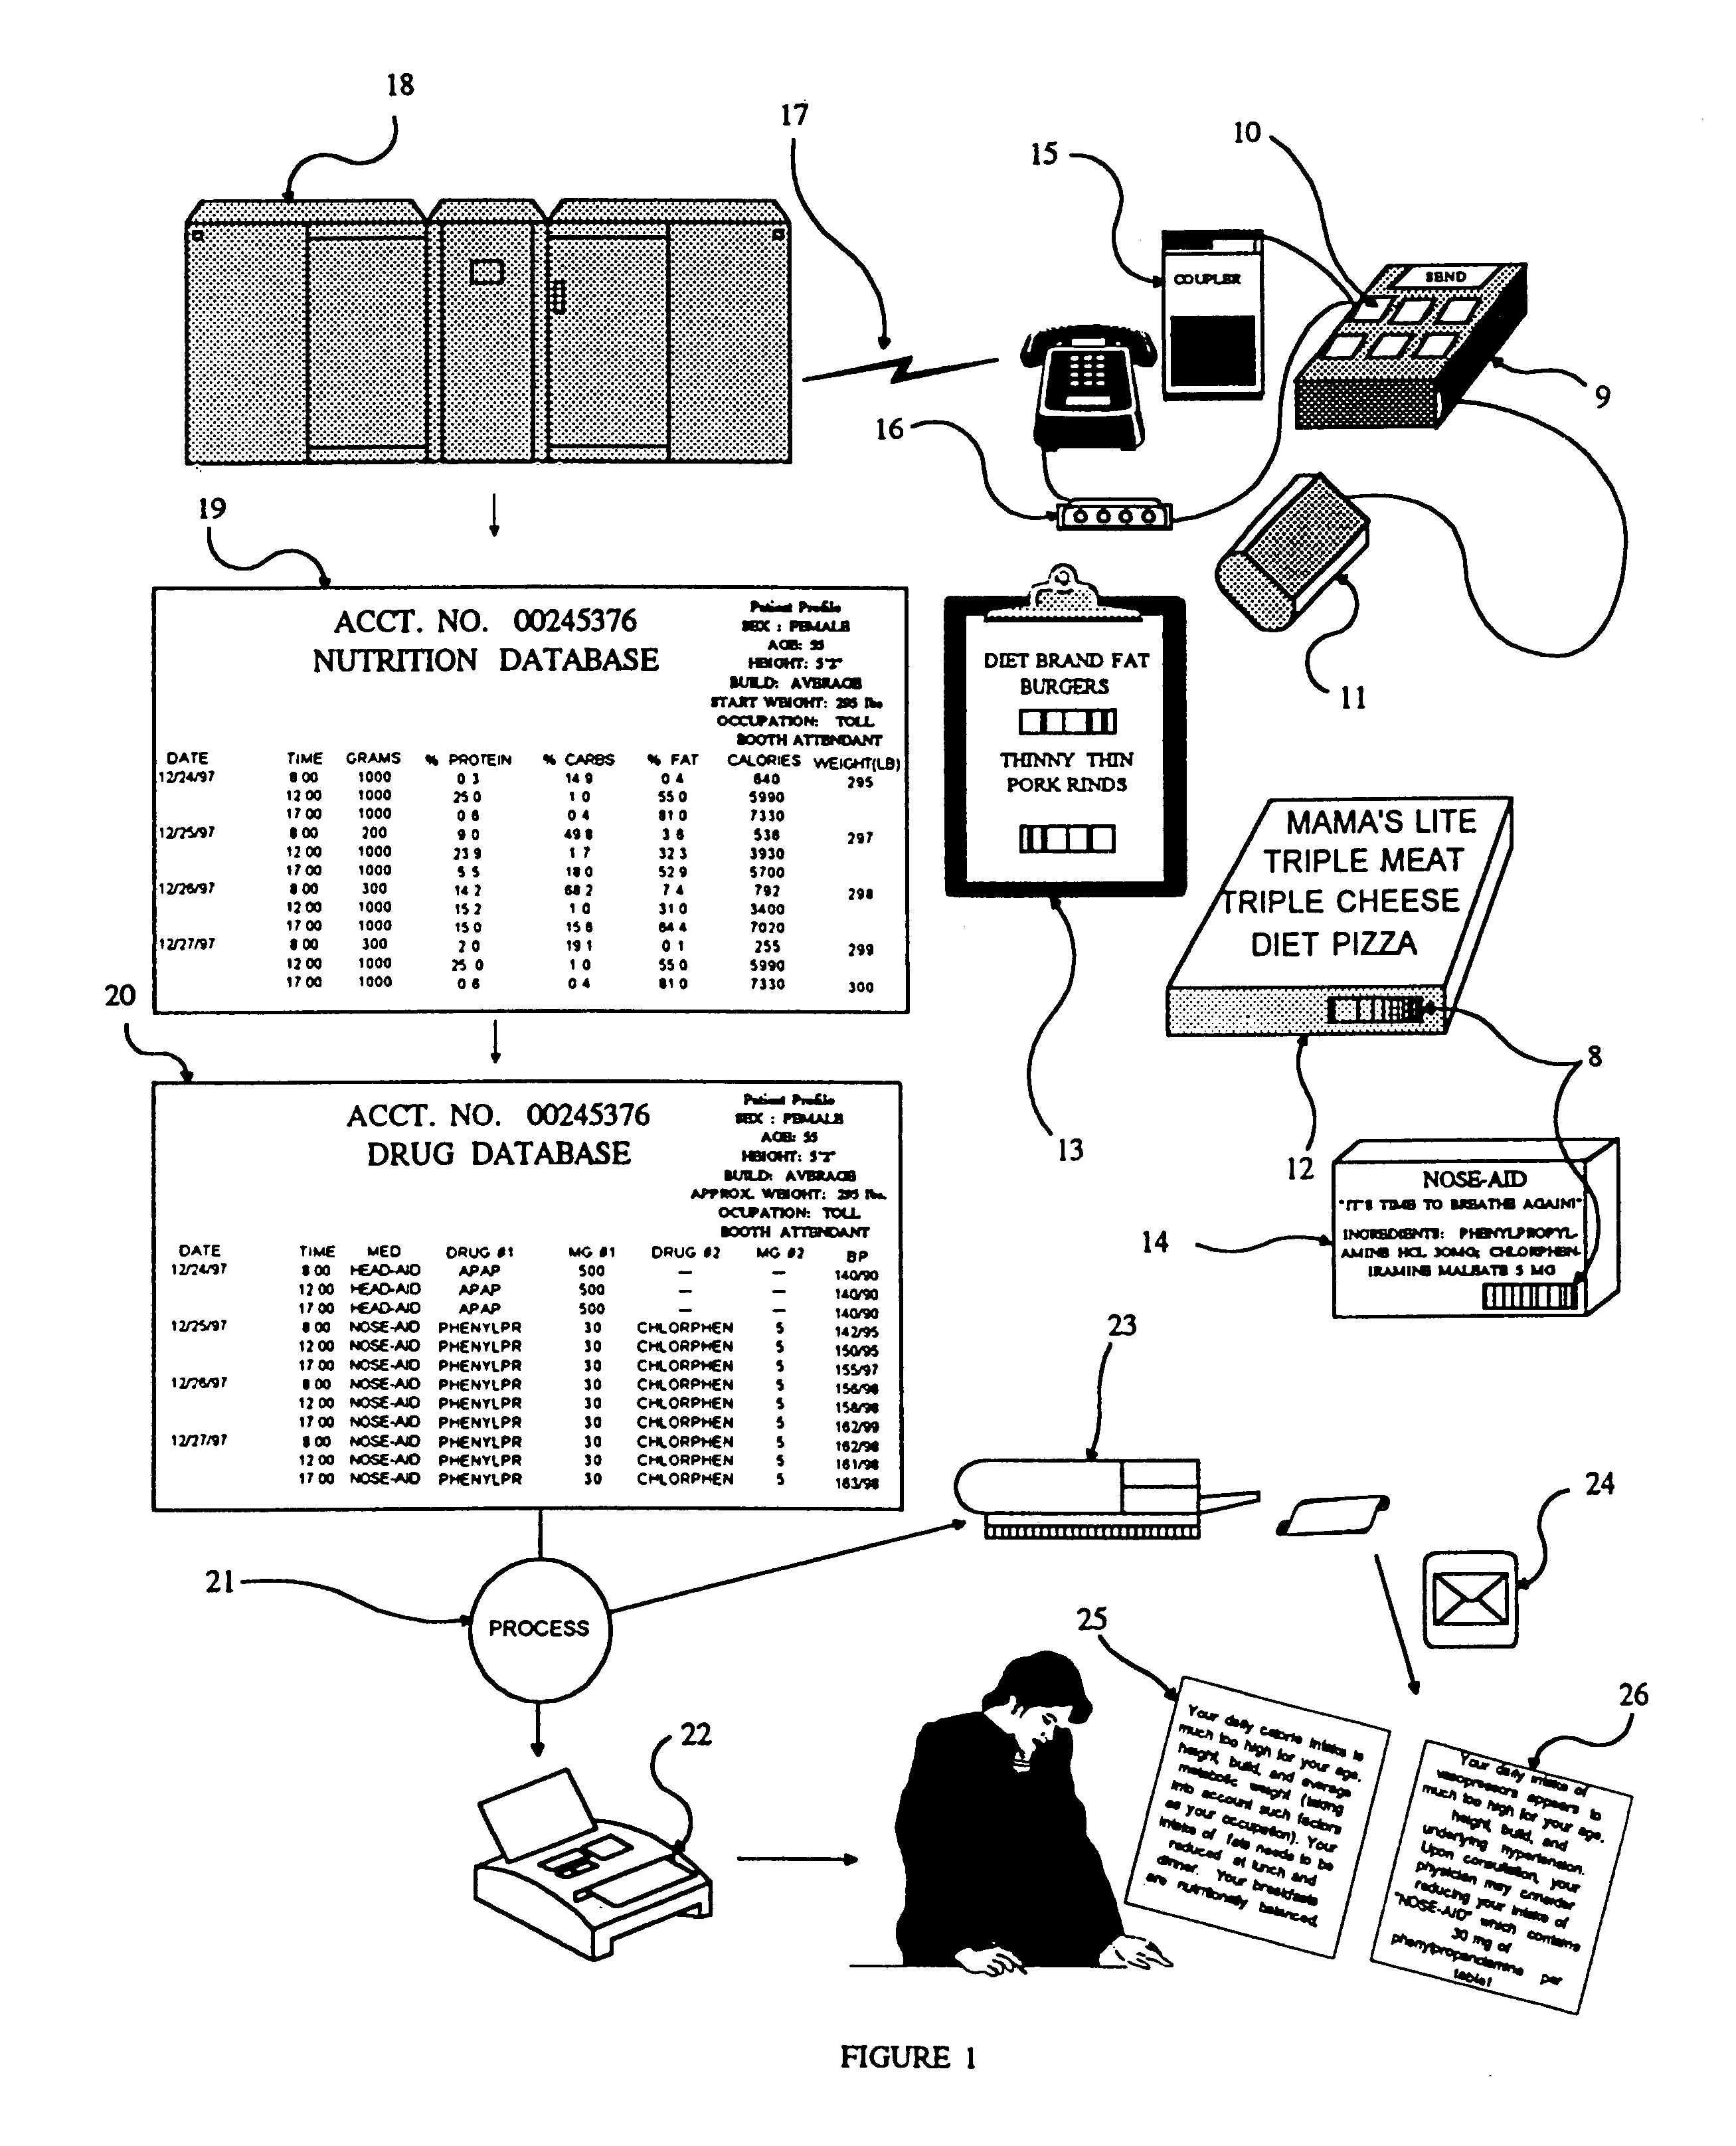 Computer-assisted method for analyzing consumptions